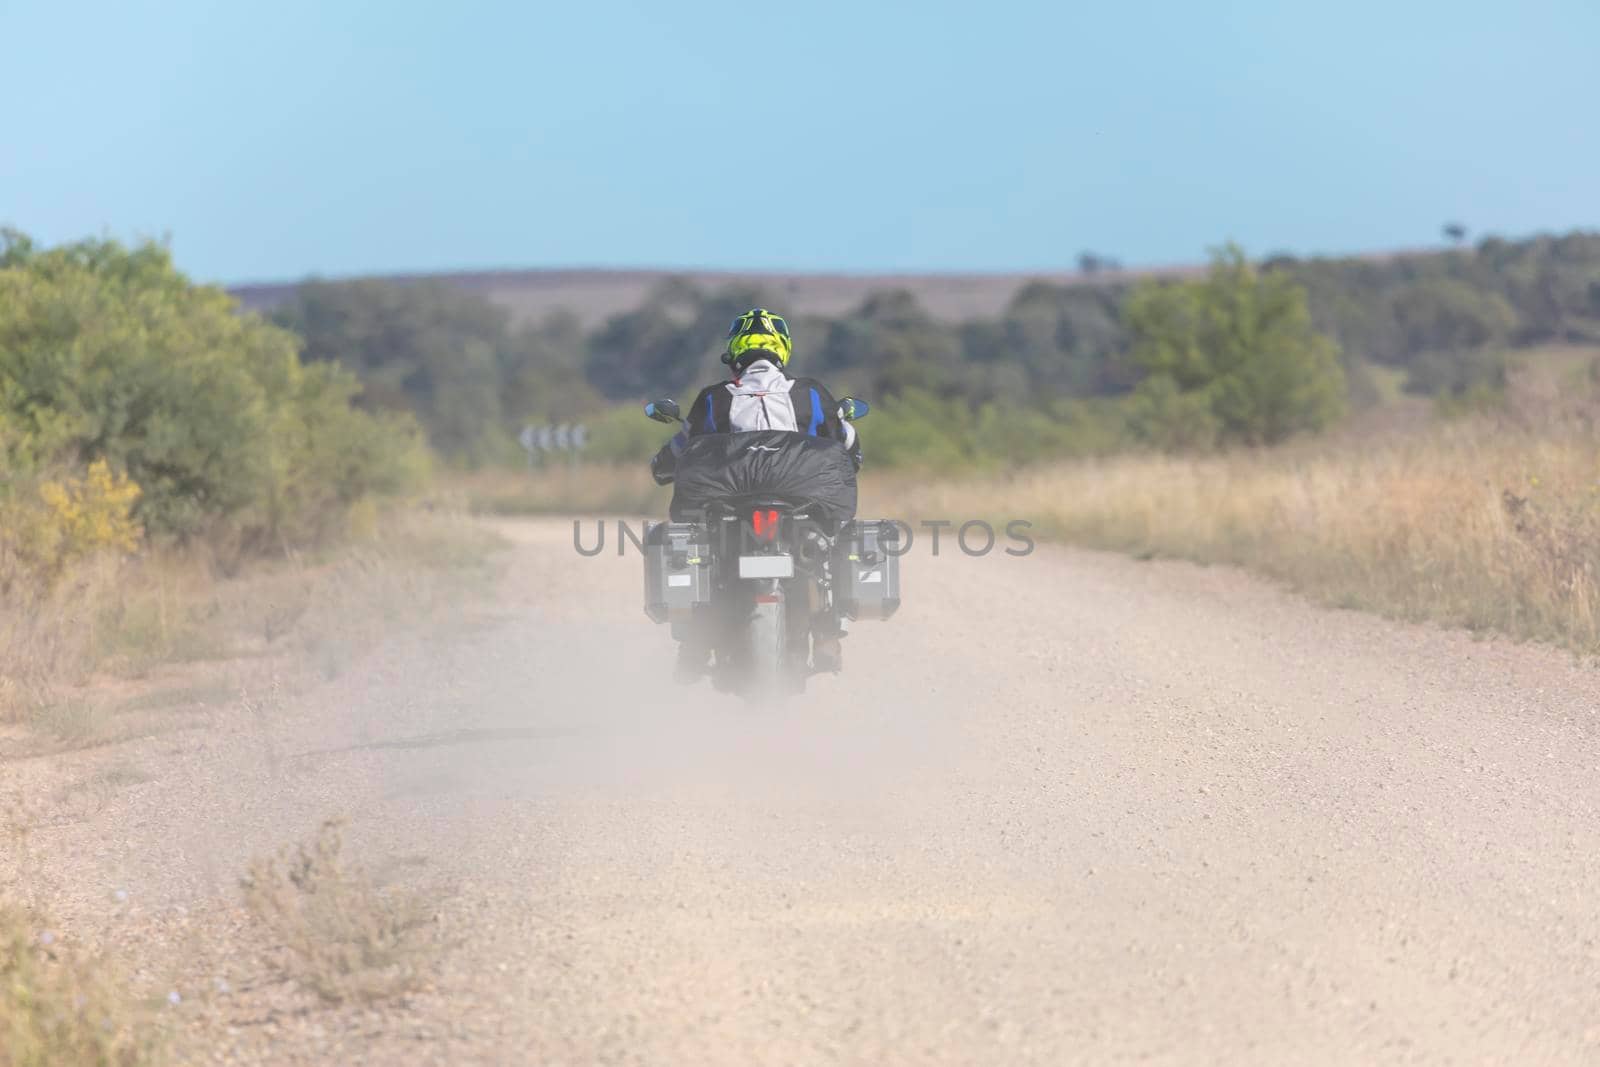 A person riding a motorcycle into the distance on a dusty dirty road